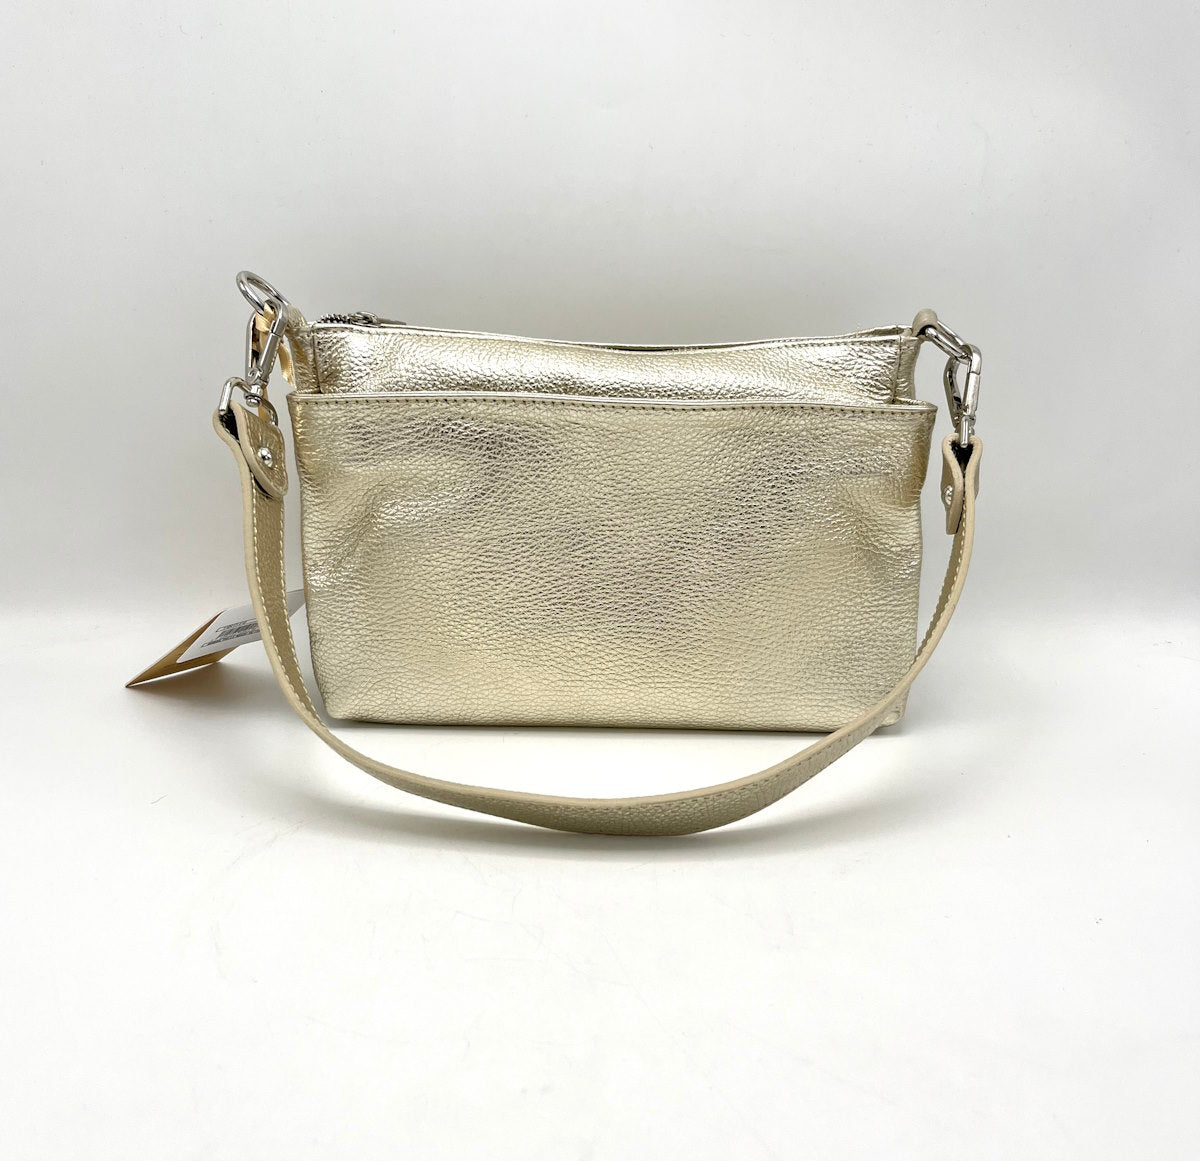 Genuine leather shoulder bag, for women, made in Italy, art. 112417.412